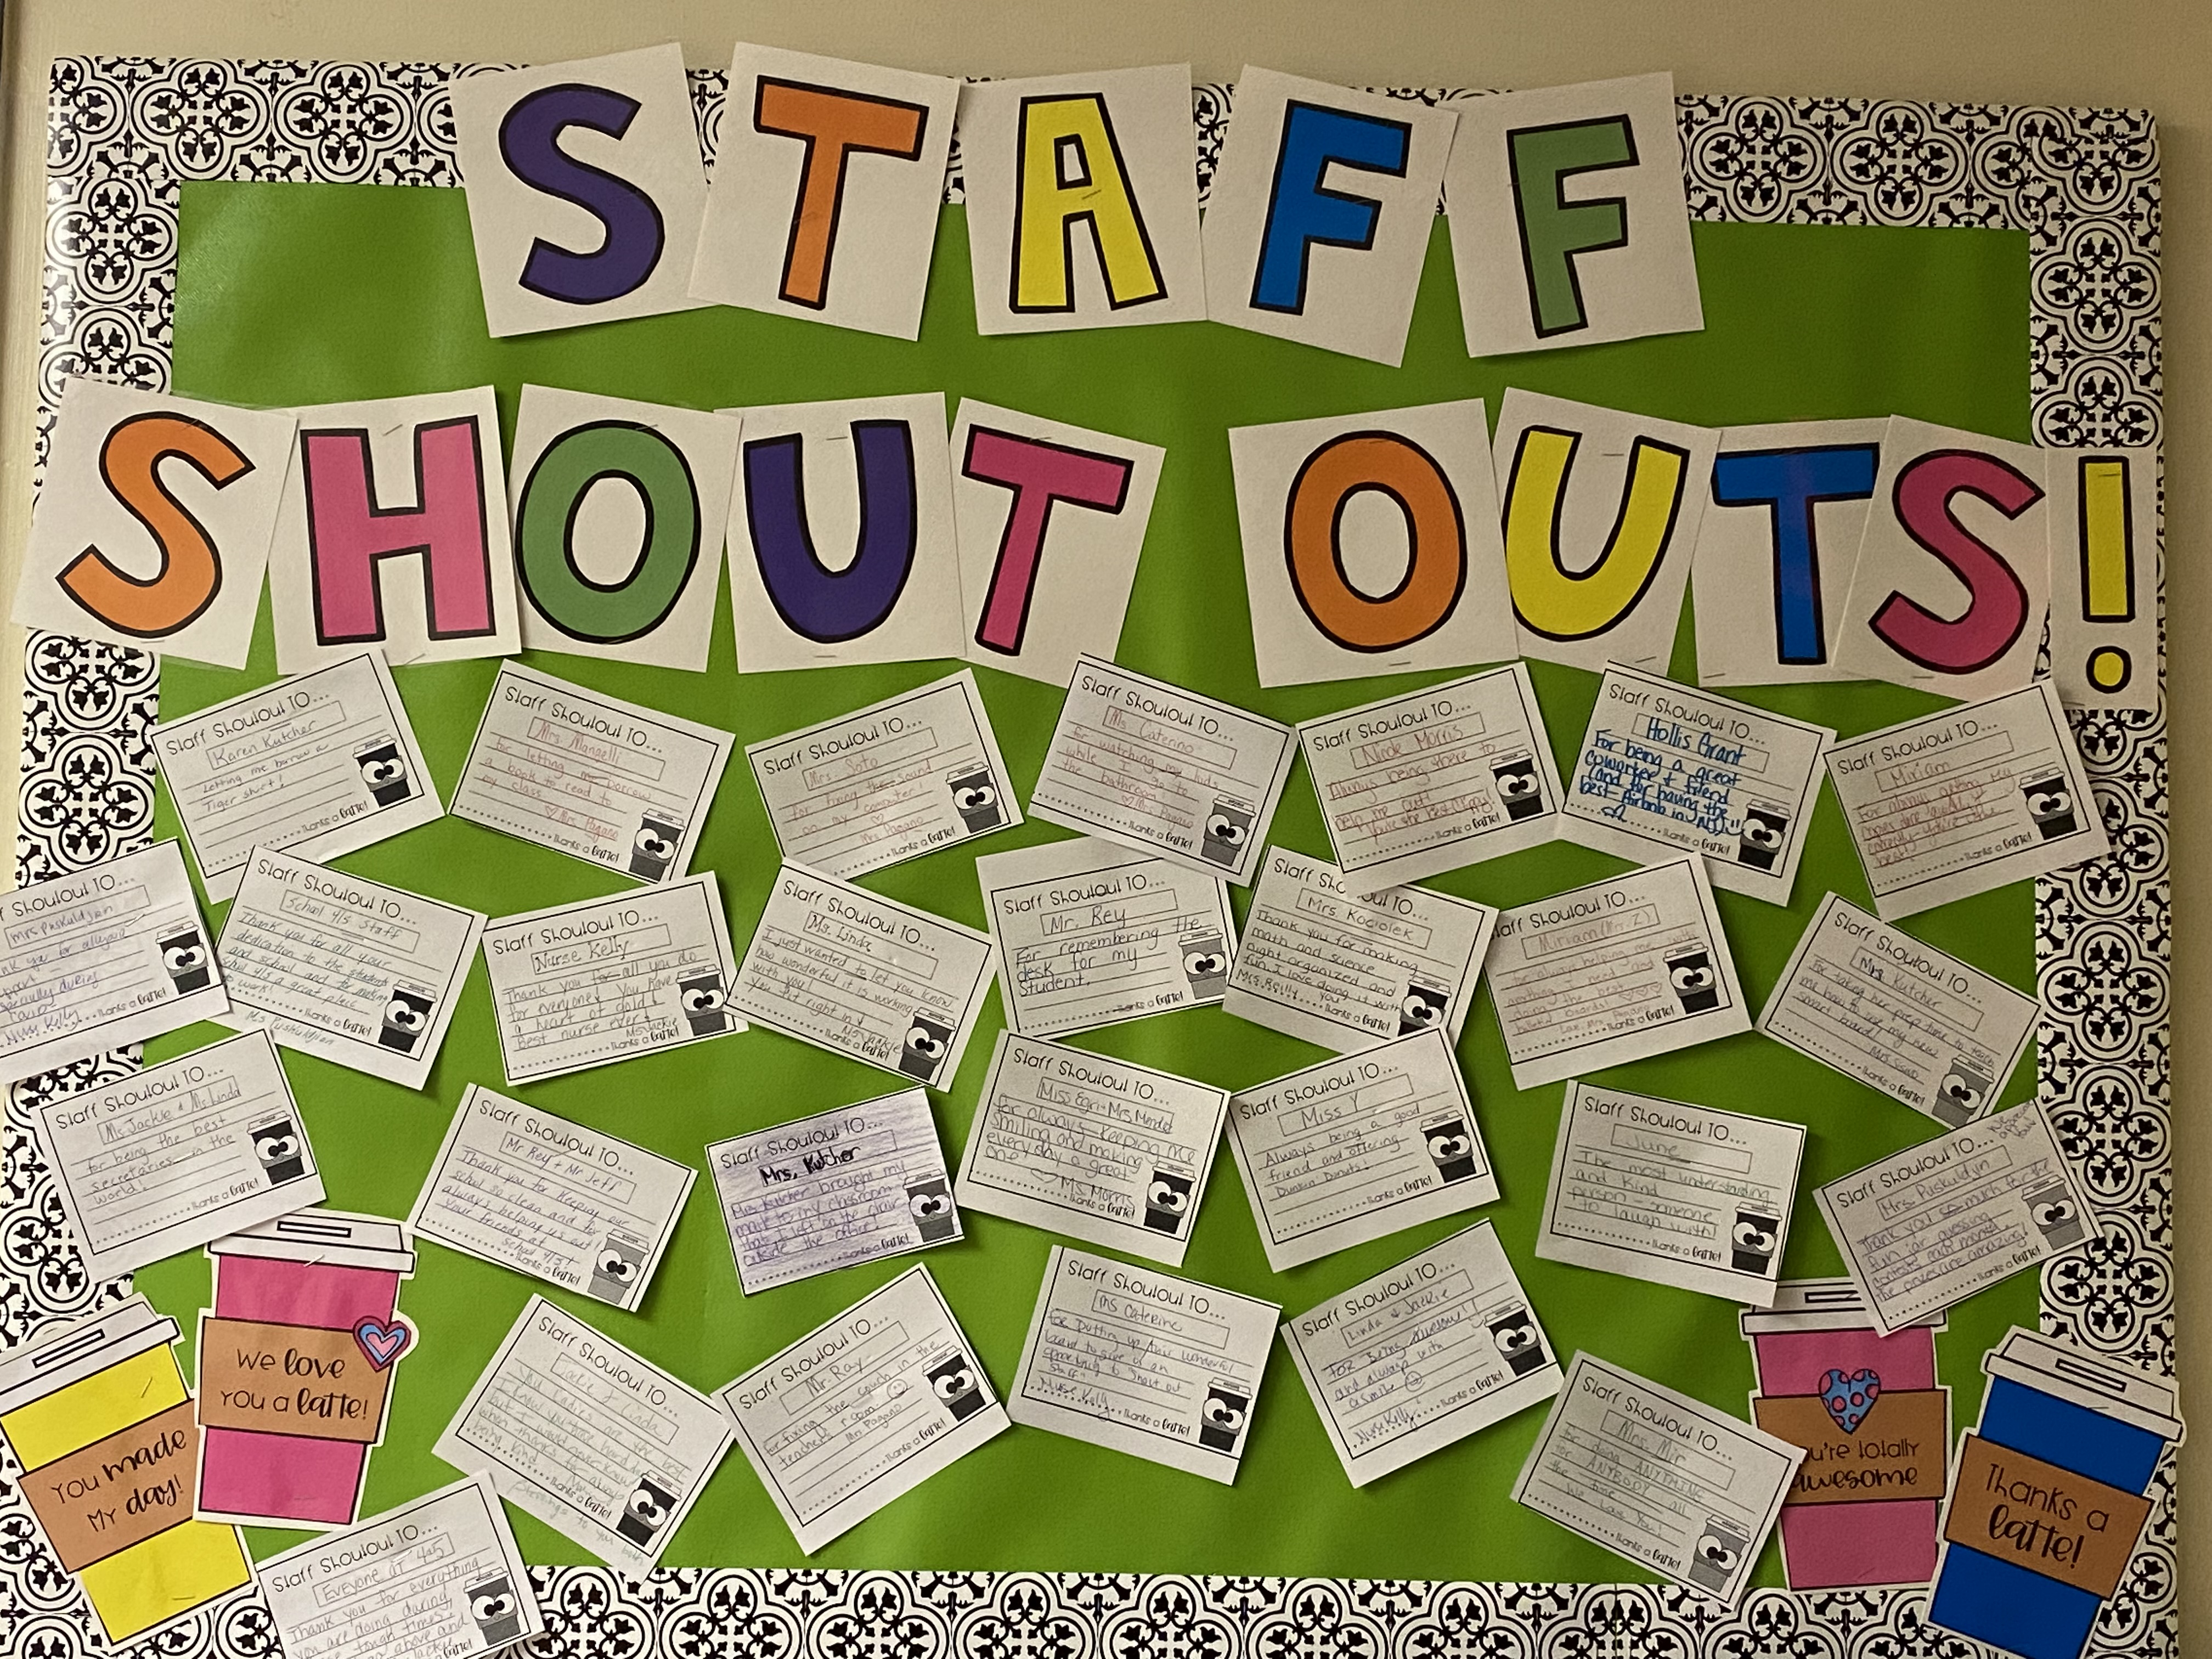 Staff Shout Outs!